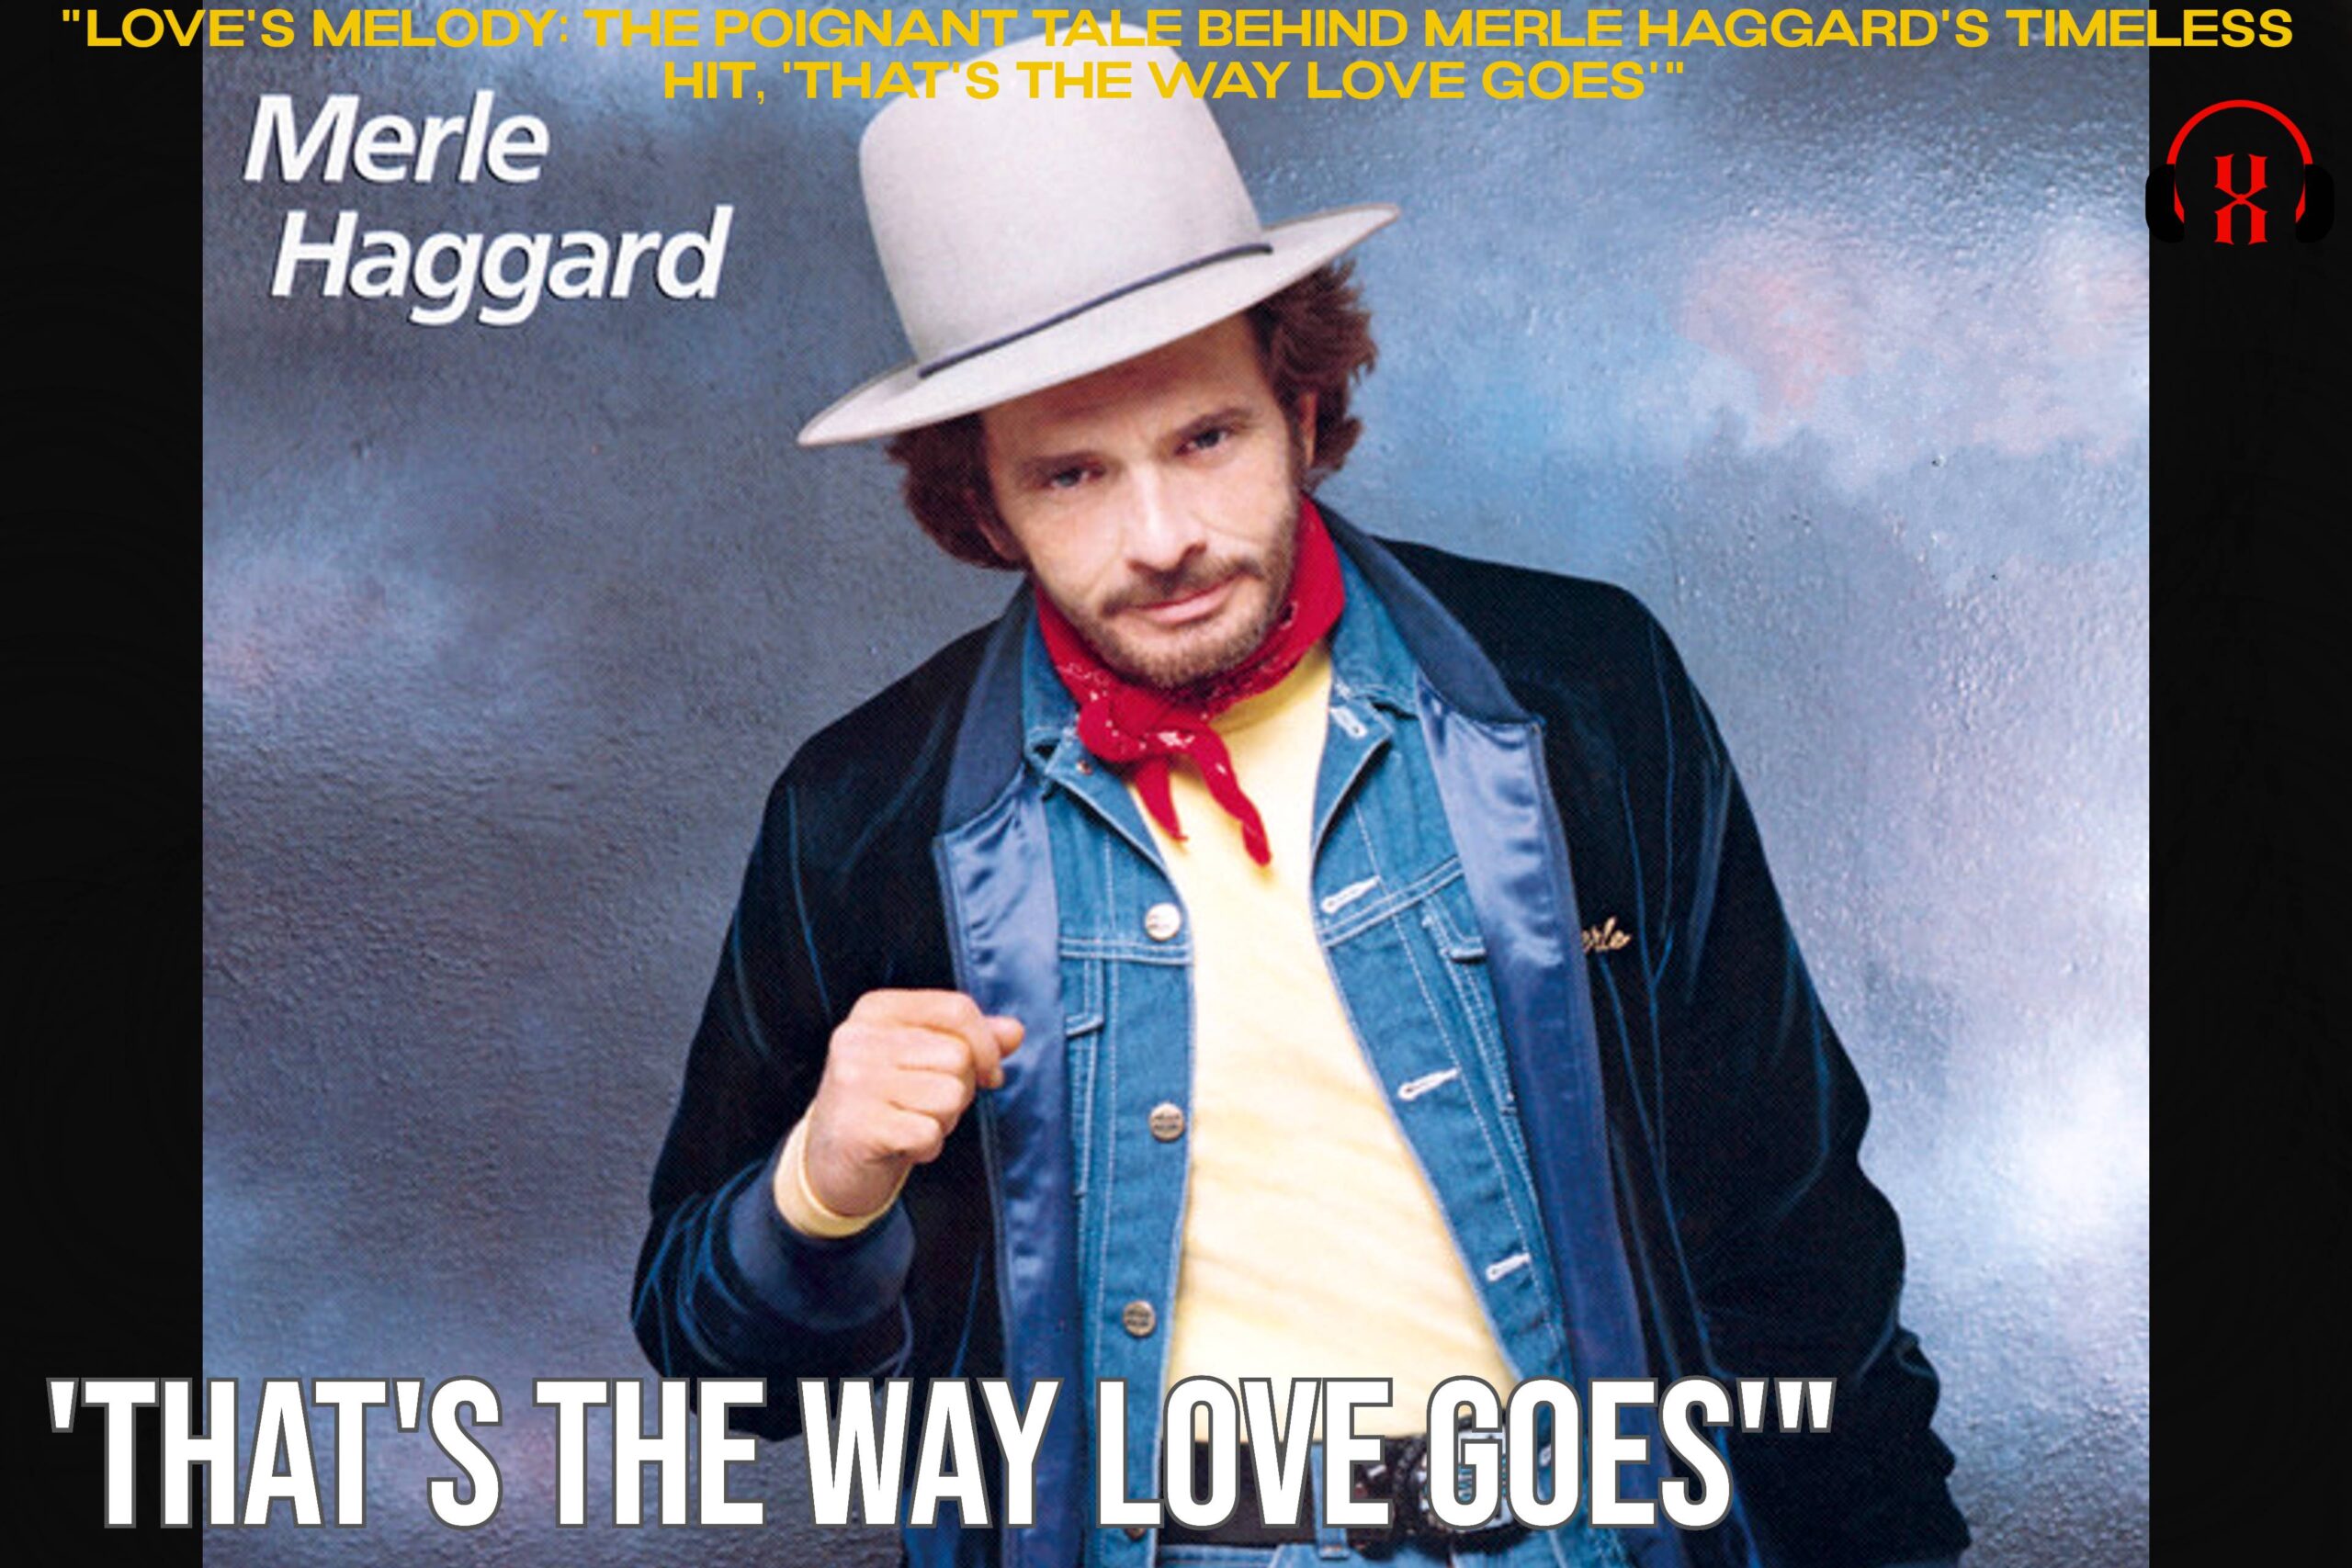 "Love's Melody: The Poignant Tale Behind Merle Haggard's Timeless Hit, 'That's the Way Love Goes'"